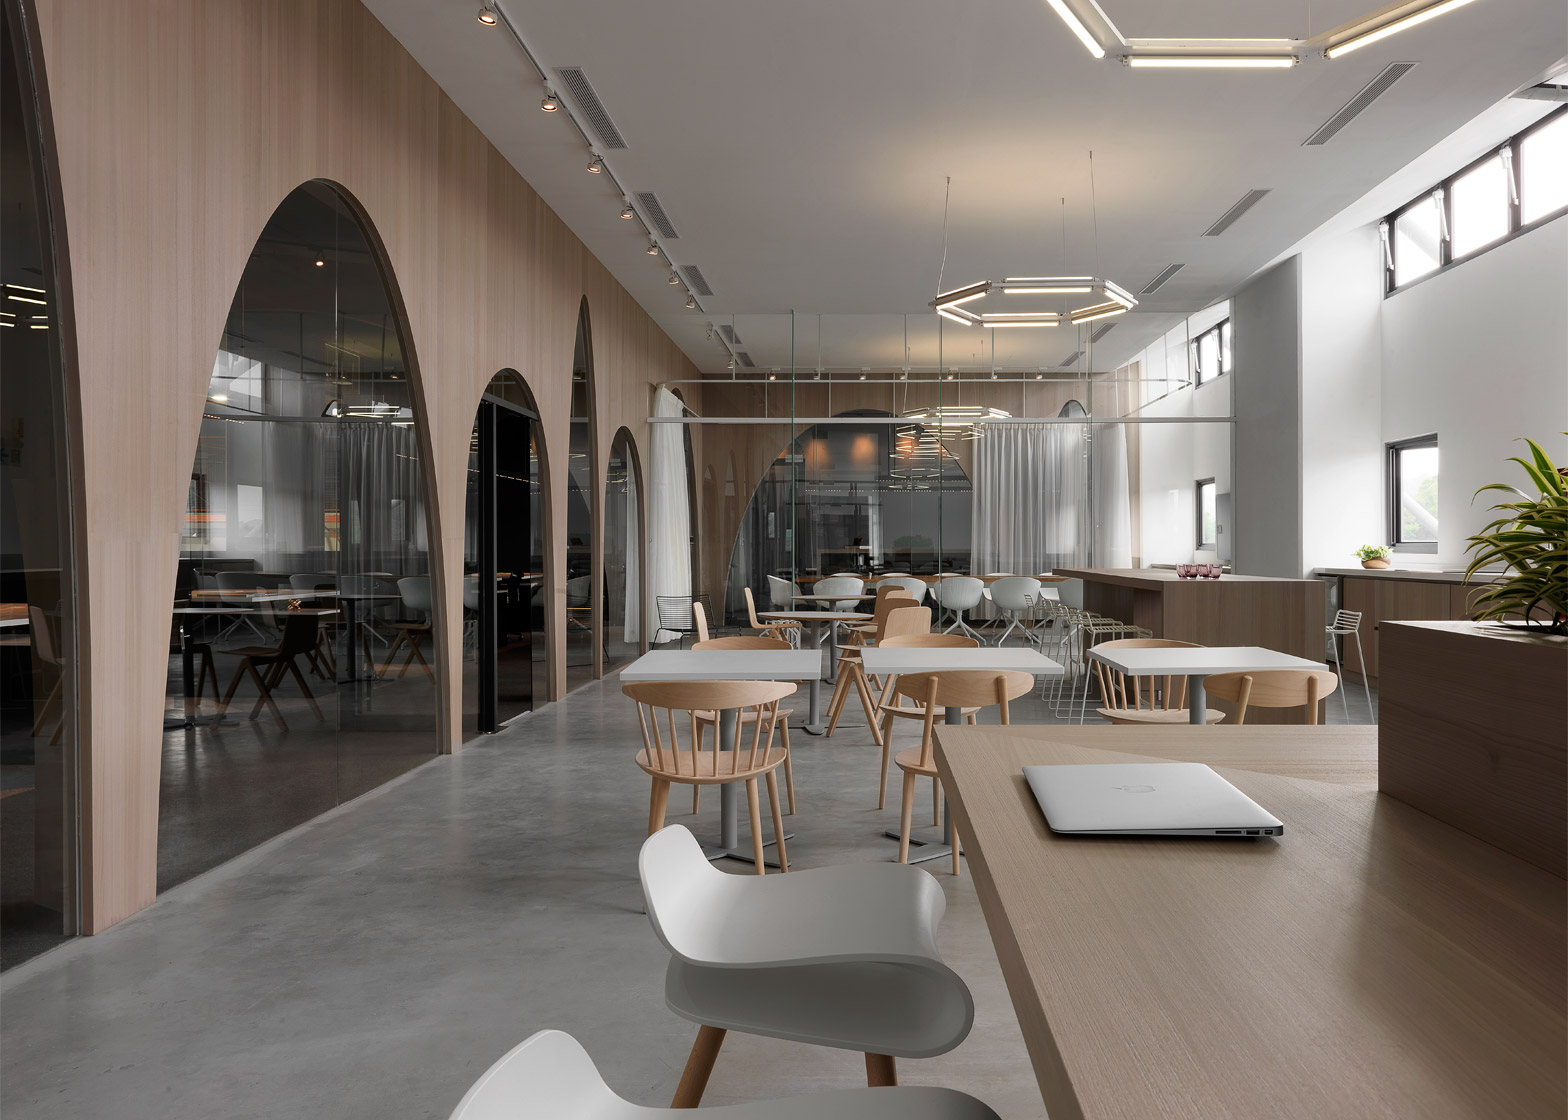 JC Architecture adds wooden arches H&M's office